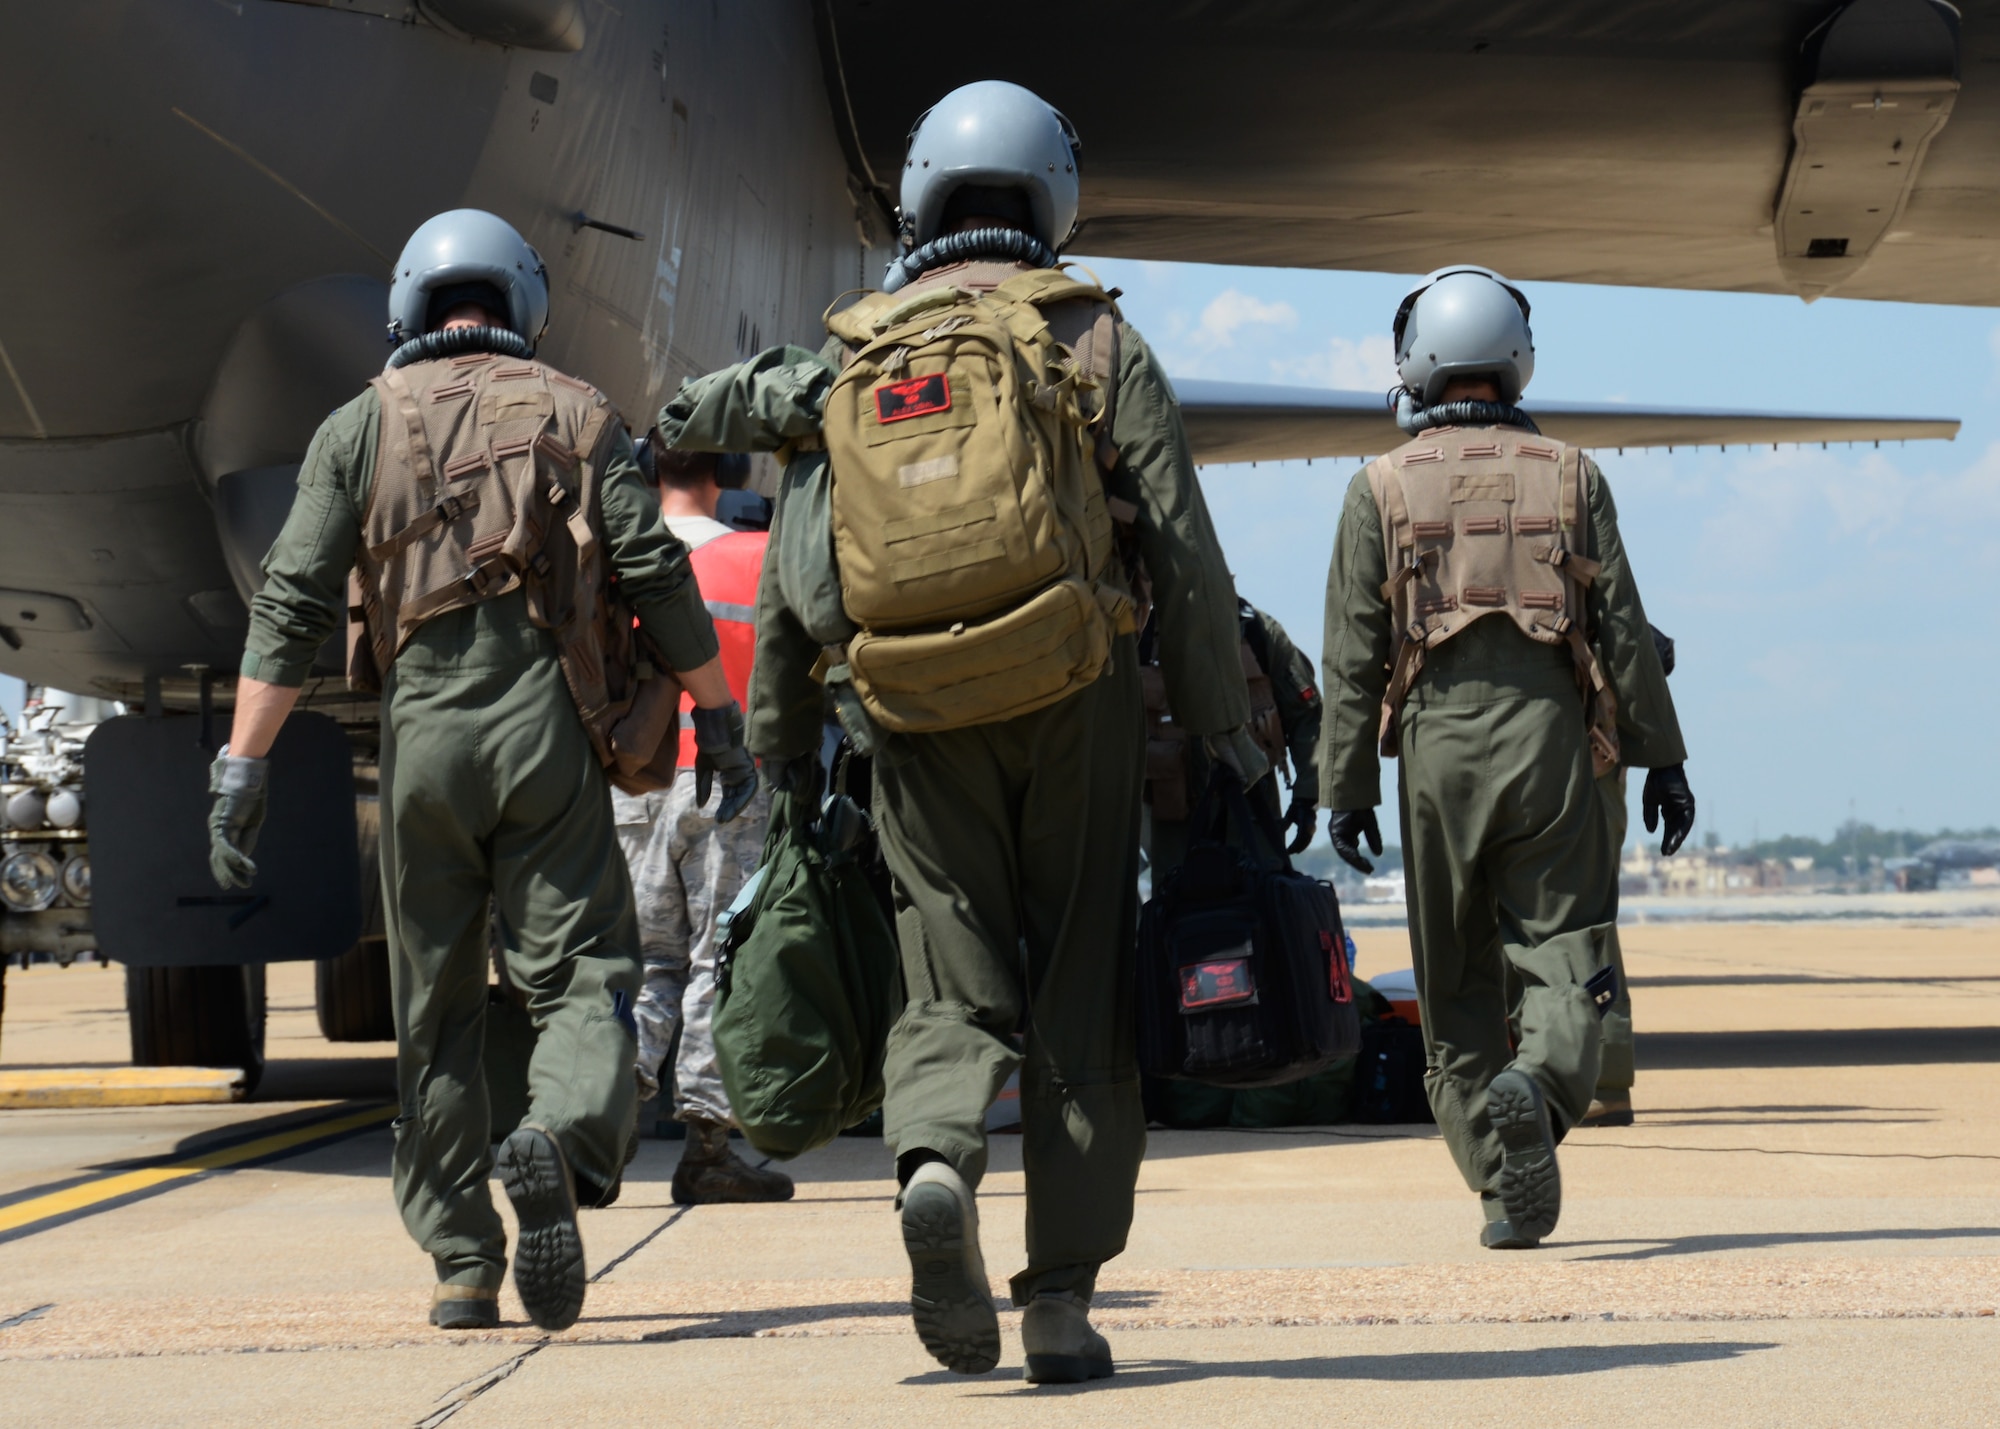 A B-52 Stratofortress aircrew assigned to Air Force Global Strike Command makes its way to the aircraft before participating in exercise Immediate Response 2015 at Barksdale Air Force Base, La., Sept. 17, 2015. The exercise supports the goal of a "strong Europe" by preparing partner nations to combine forces, ensuring unified security across allied nations. (U.S Air Force photo/Senior Airman Amanda Morris)